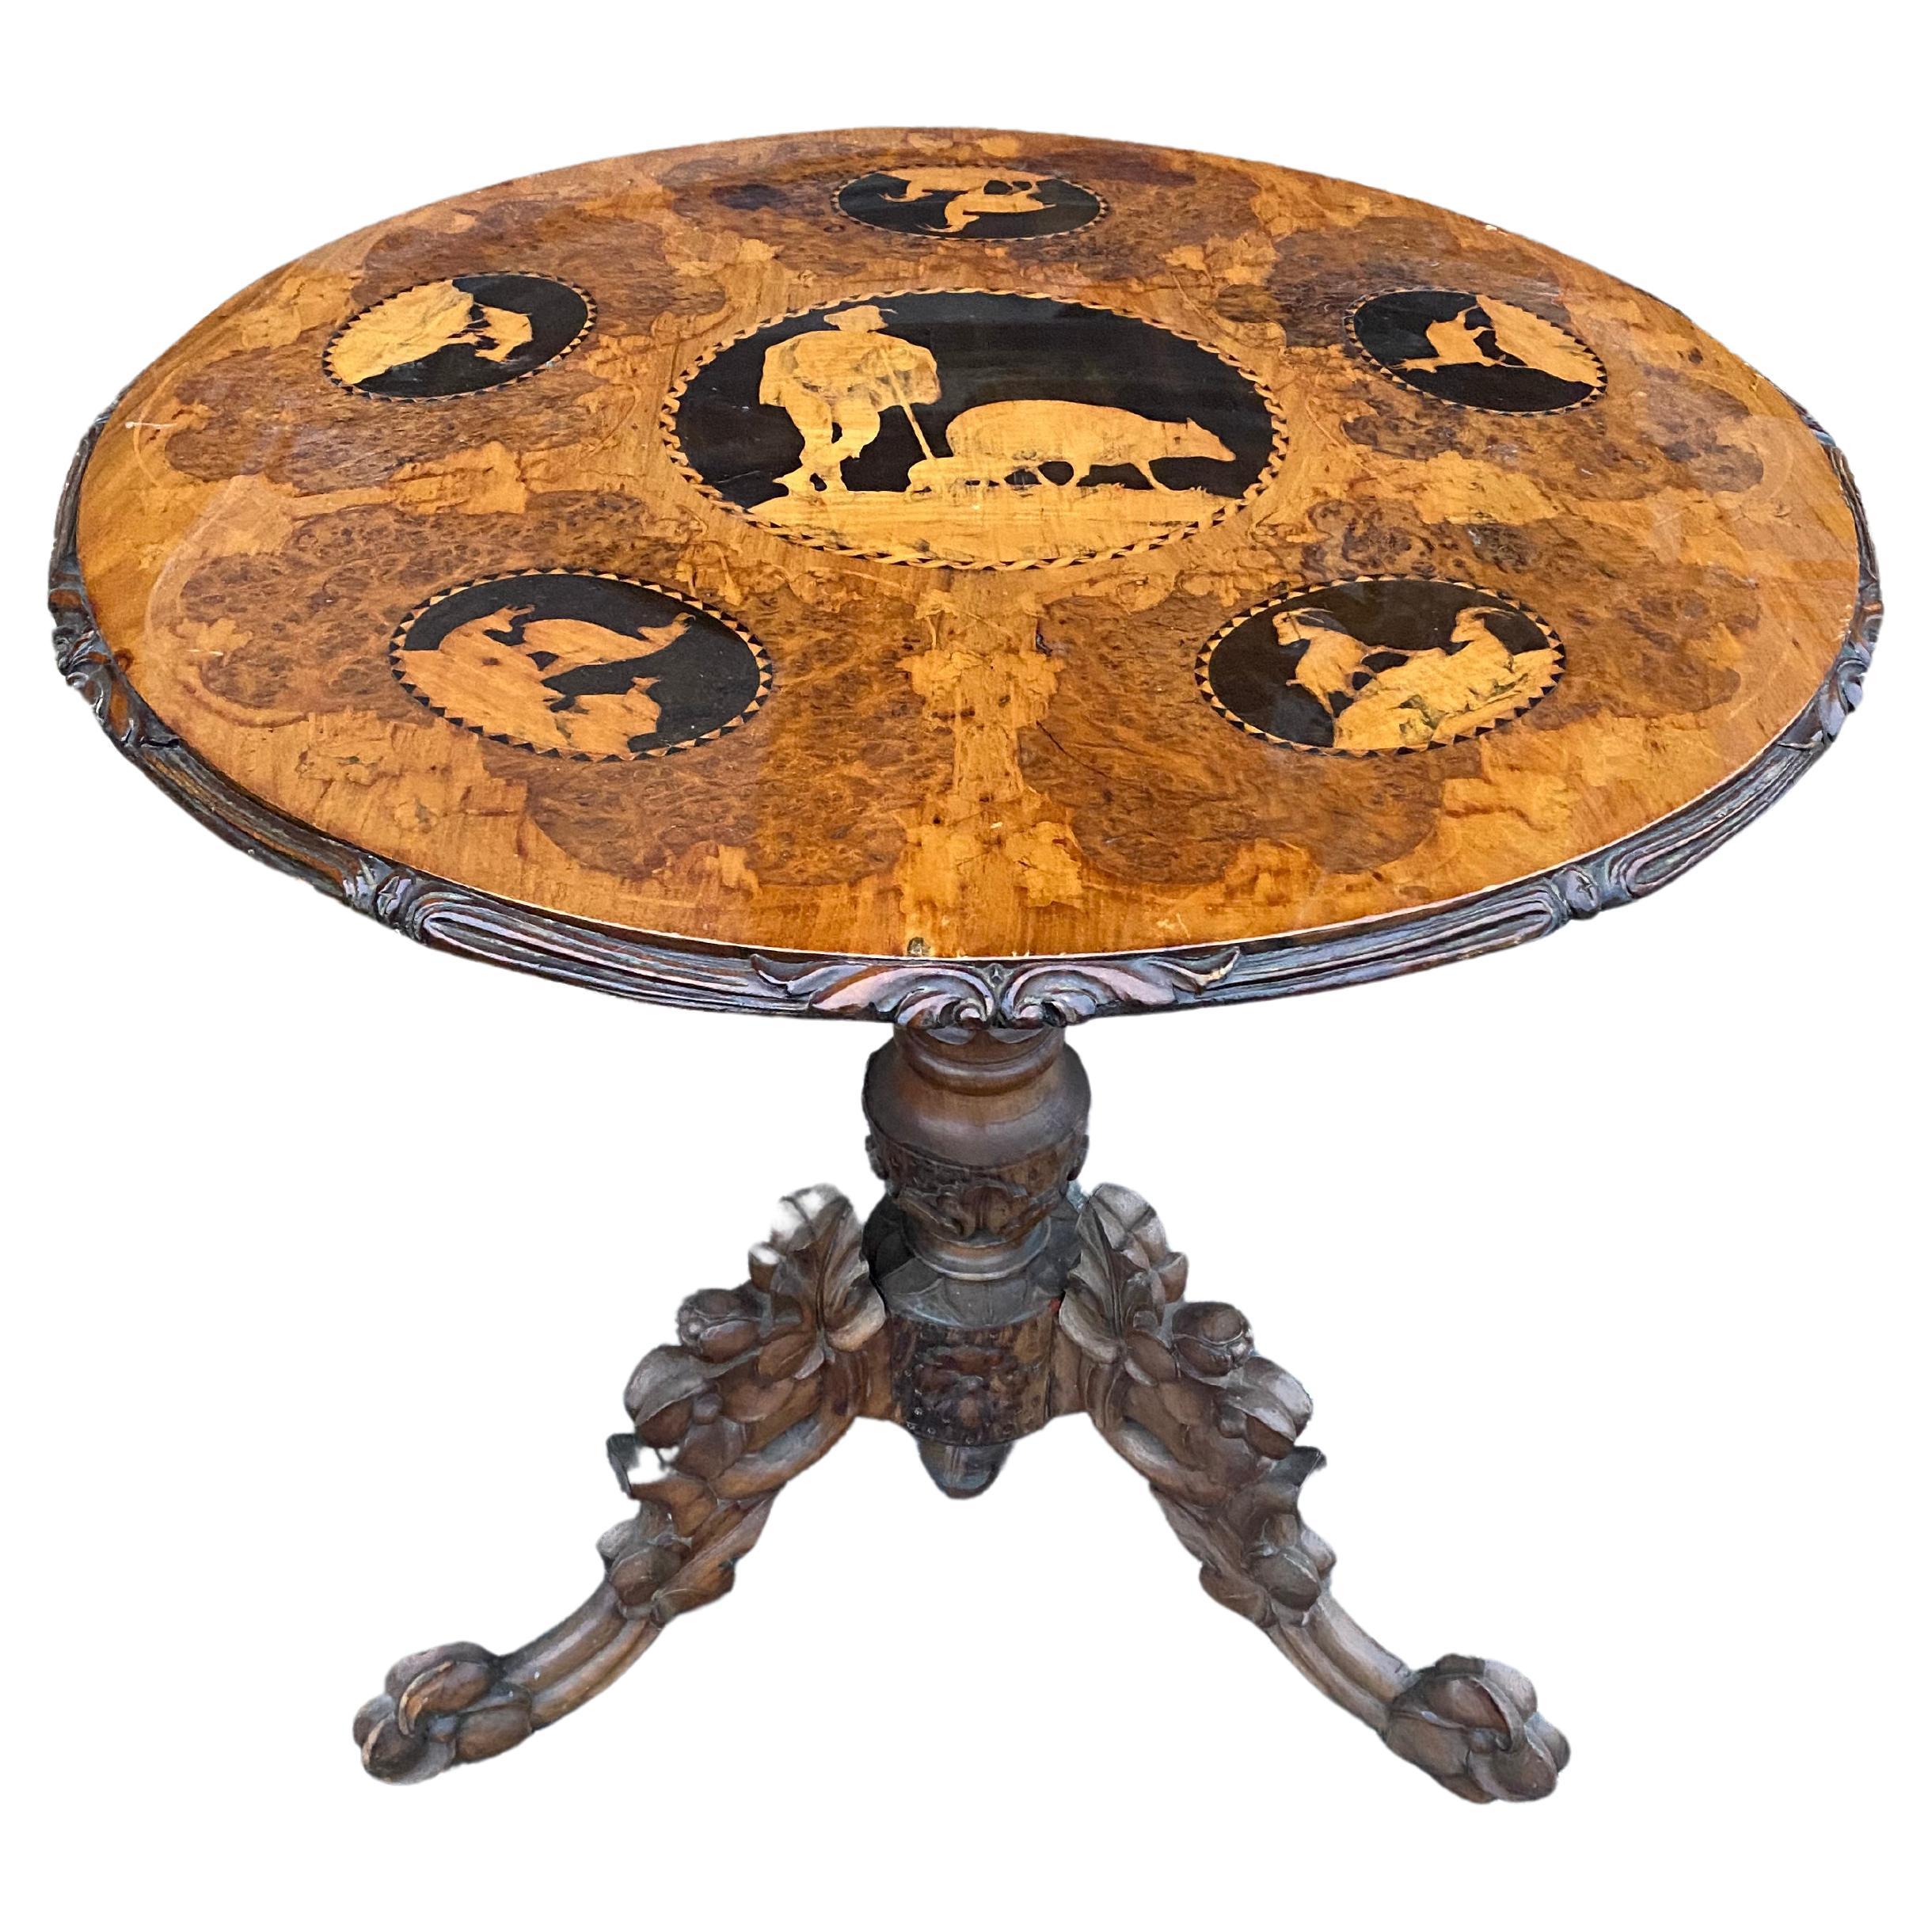 Late 19th-Early 20th Century Carved and Inlaid Black Forest Table with Stags